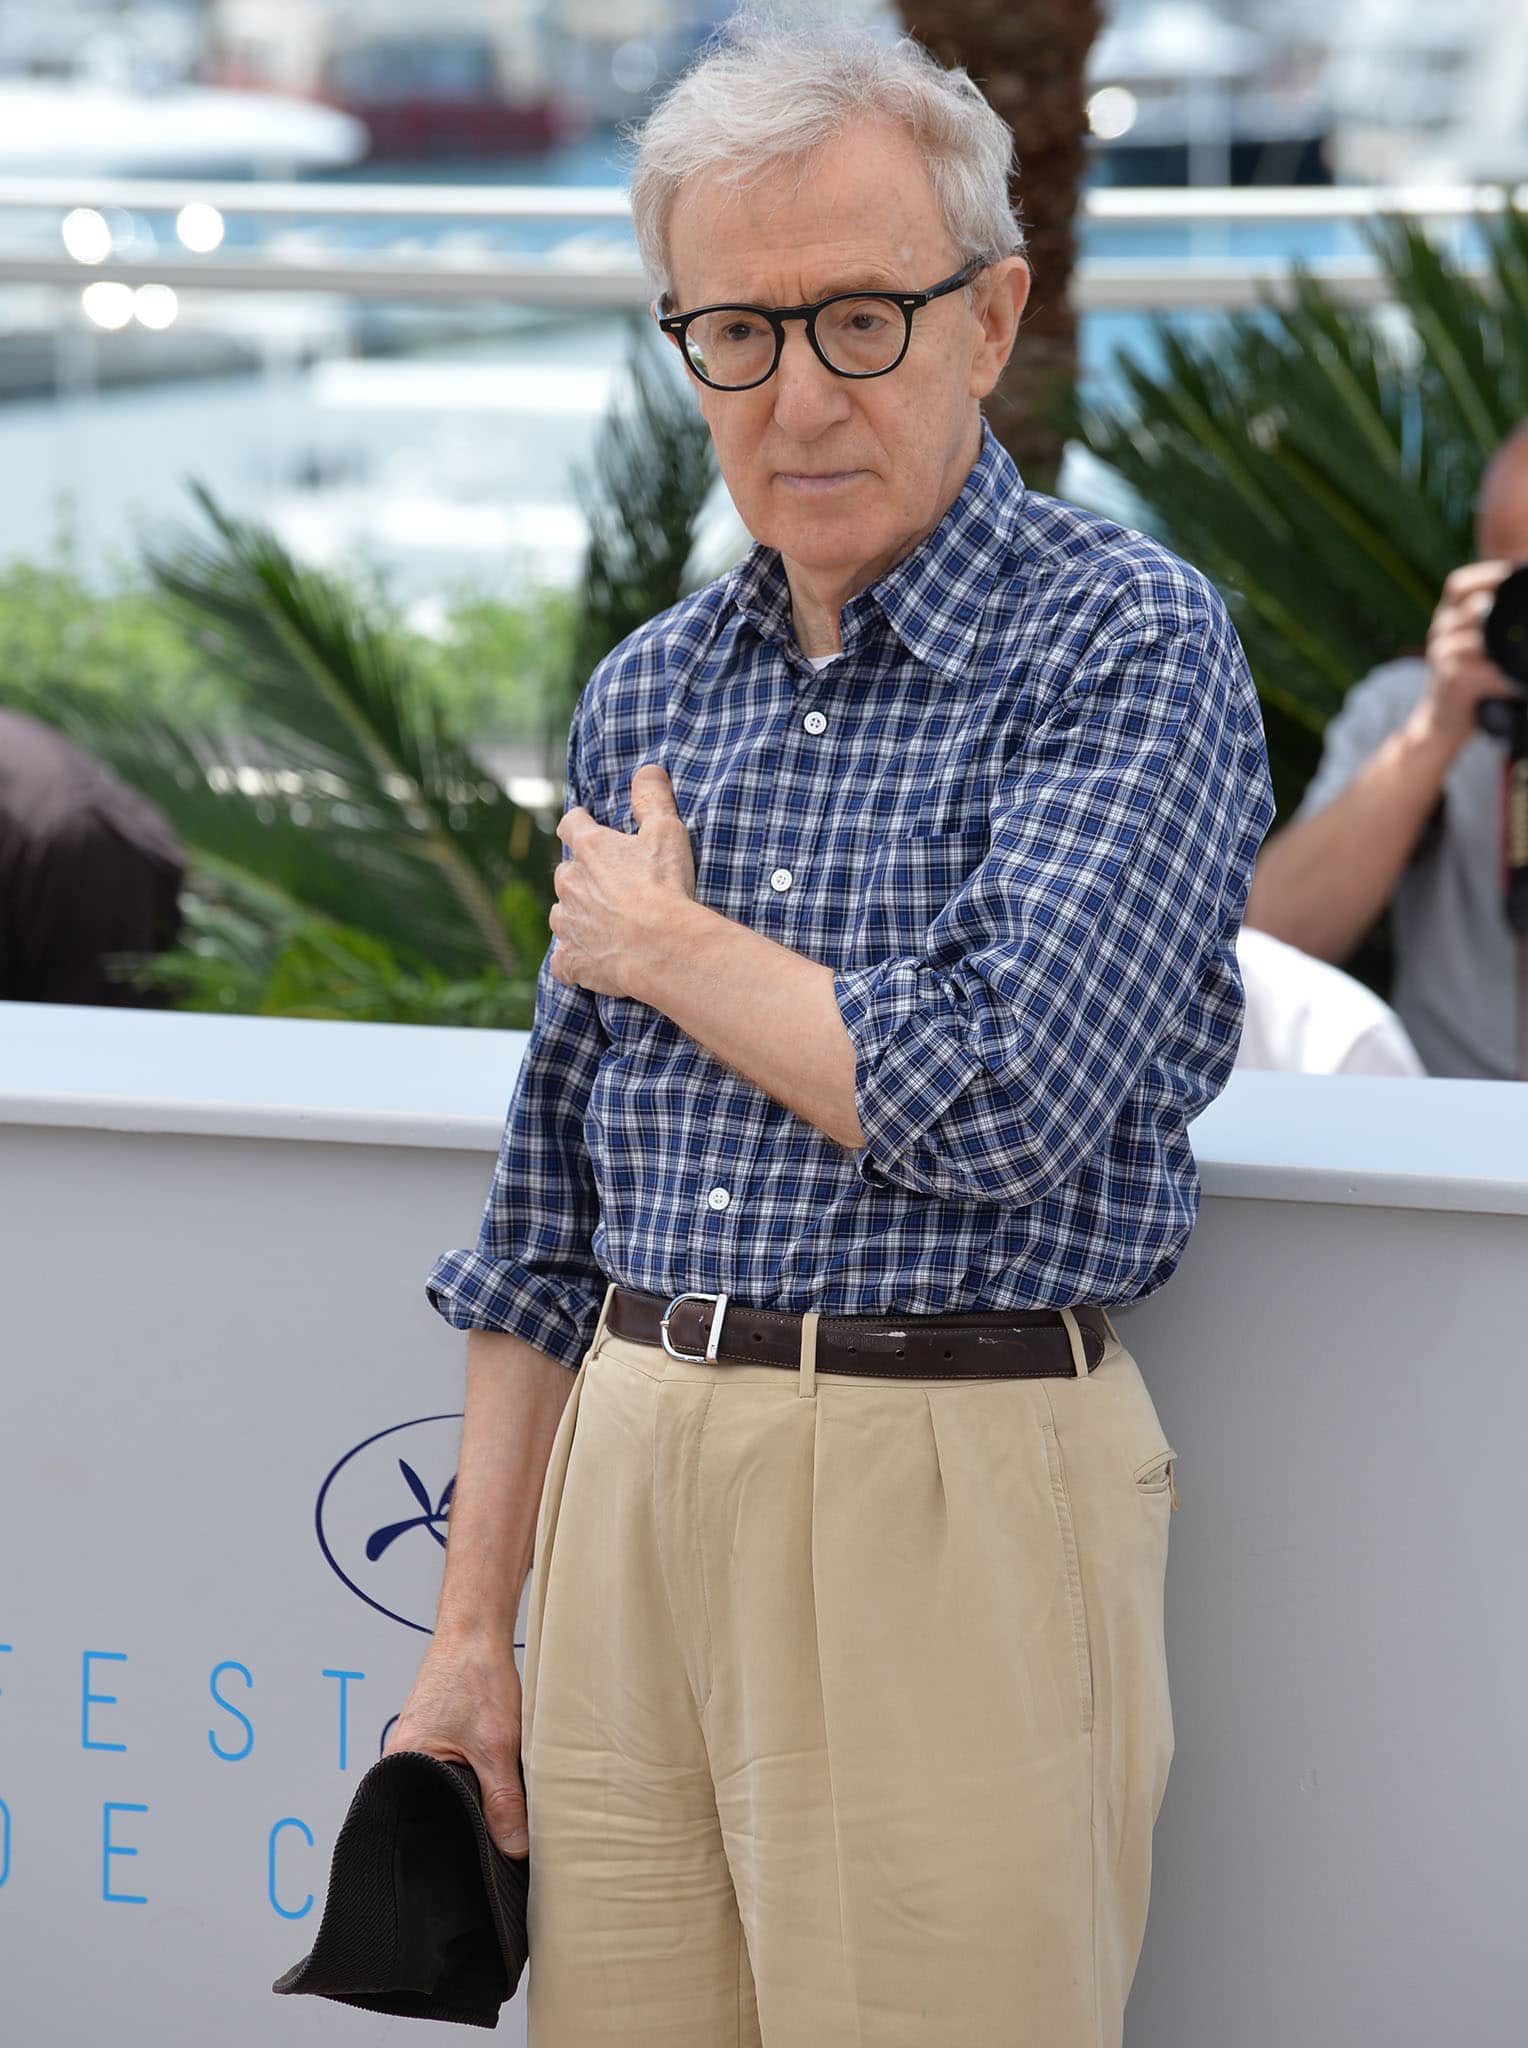 With a career spanning more than six decades, Woody Allen has received multiple accolades, including four Academy Awards—one for Best Director and three for Best Original Screenplay